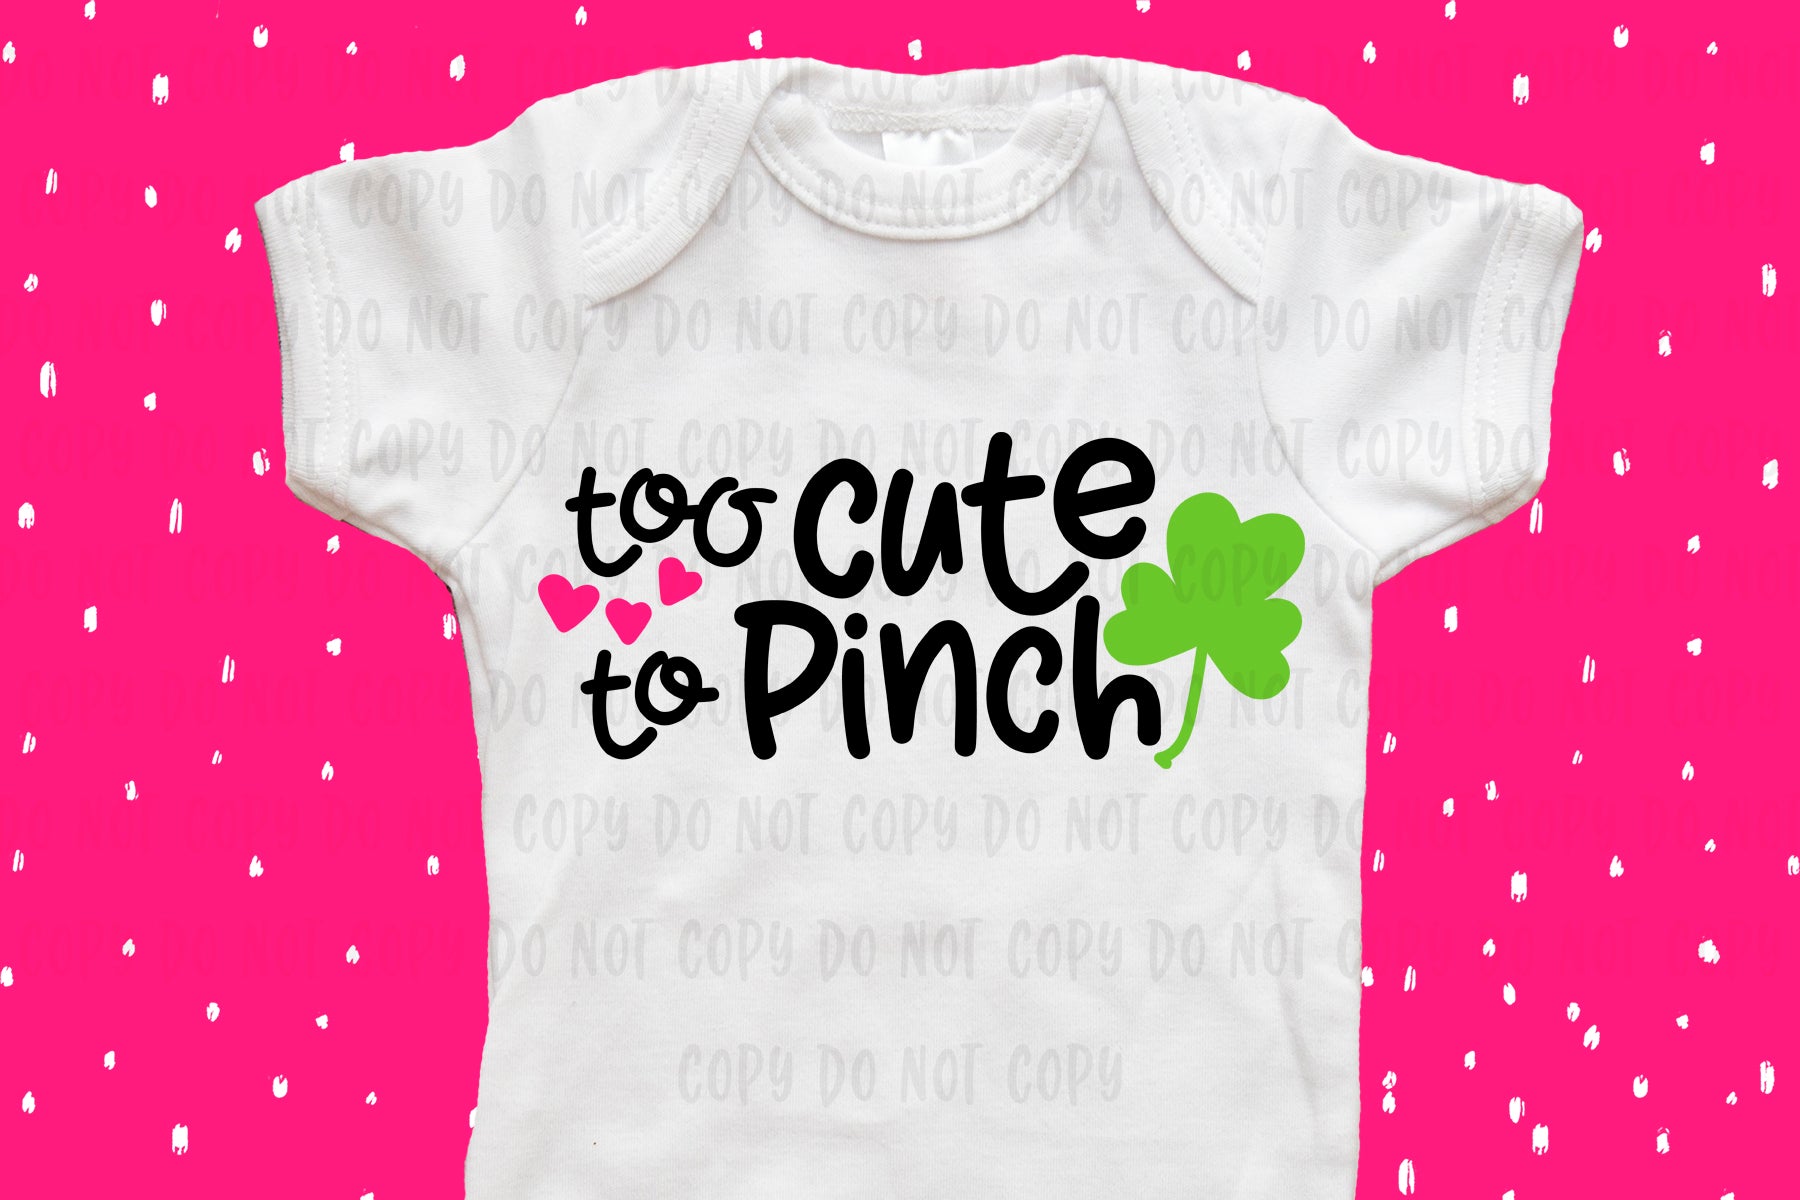 Download Too Cute To Pinch Design File Dxf Eps Png Svg Perfect For Vinyl Howdoesshe